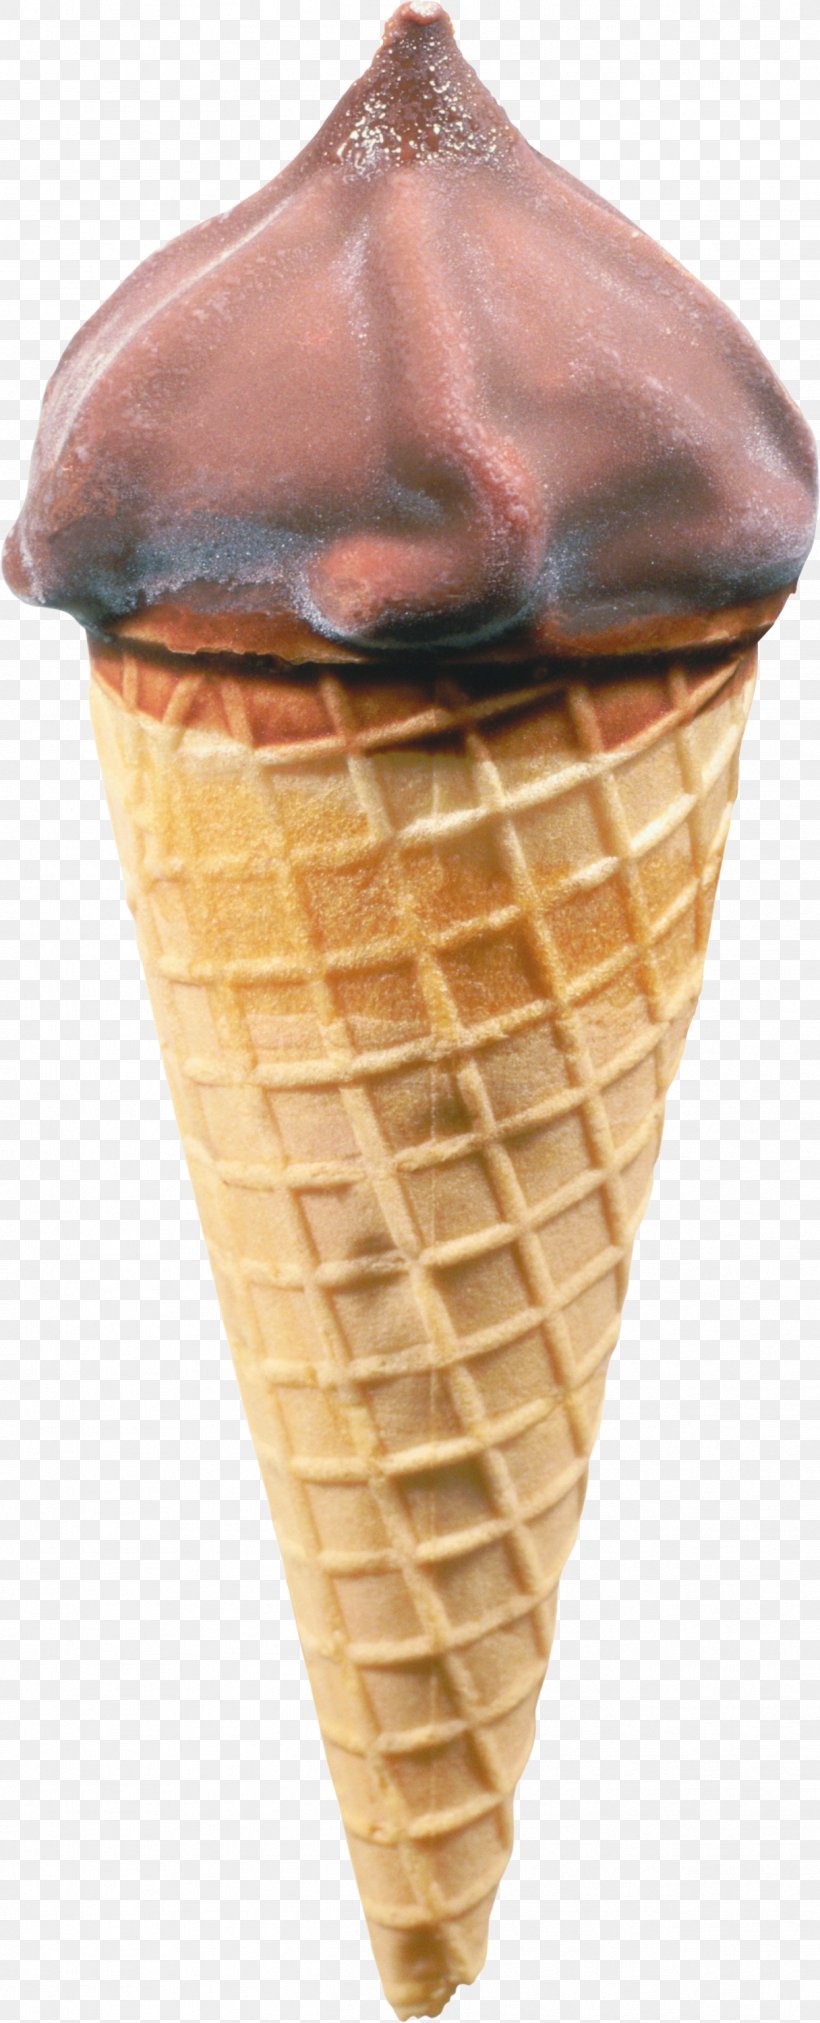 Ice Cream Cones Chocolate Ice Cream Waffle, PNG, 1216x3000px, Ice Cream Cones, Chocolate, Chocolate Ice Cream, Cream, Dairy Product Download Free